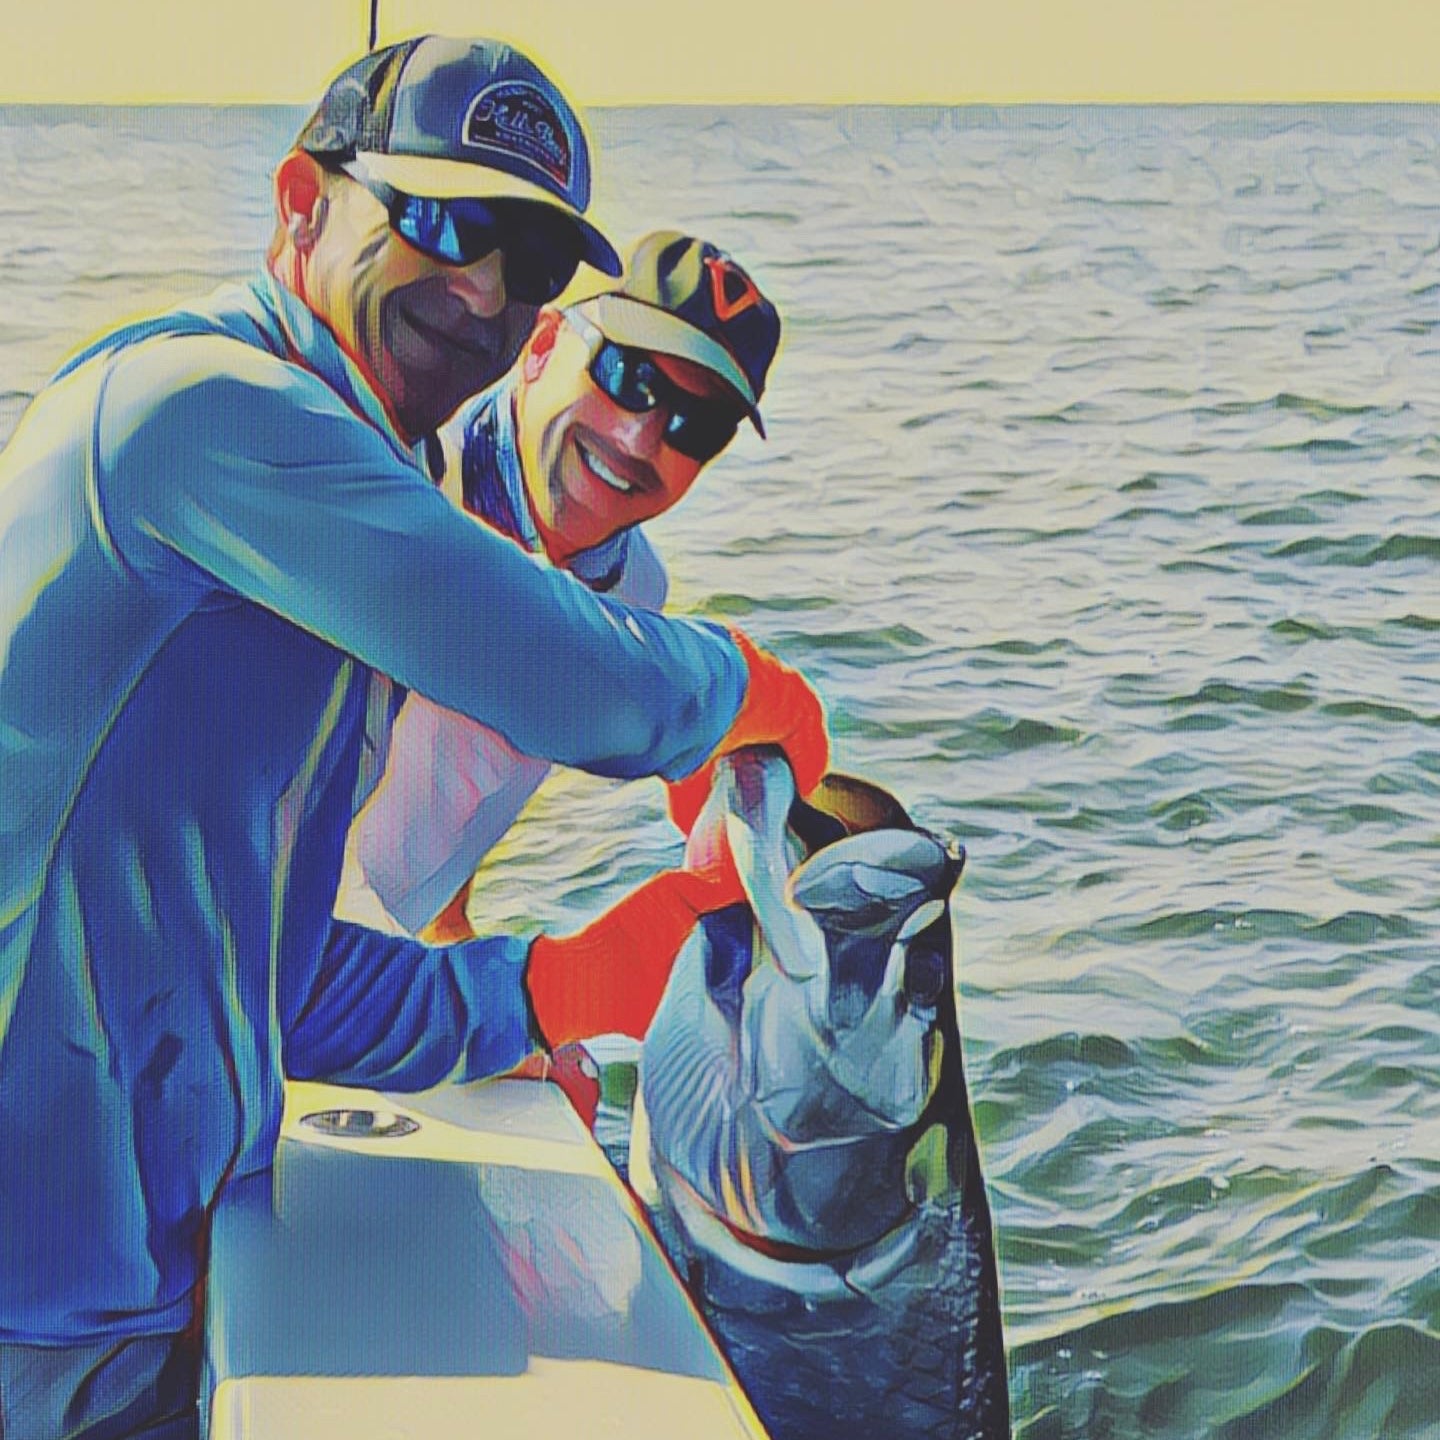 Super start to the week getting into some tarpon, jacks and bull reds!